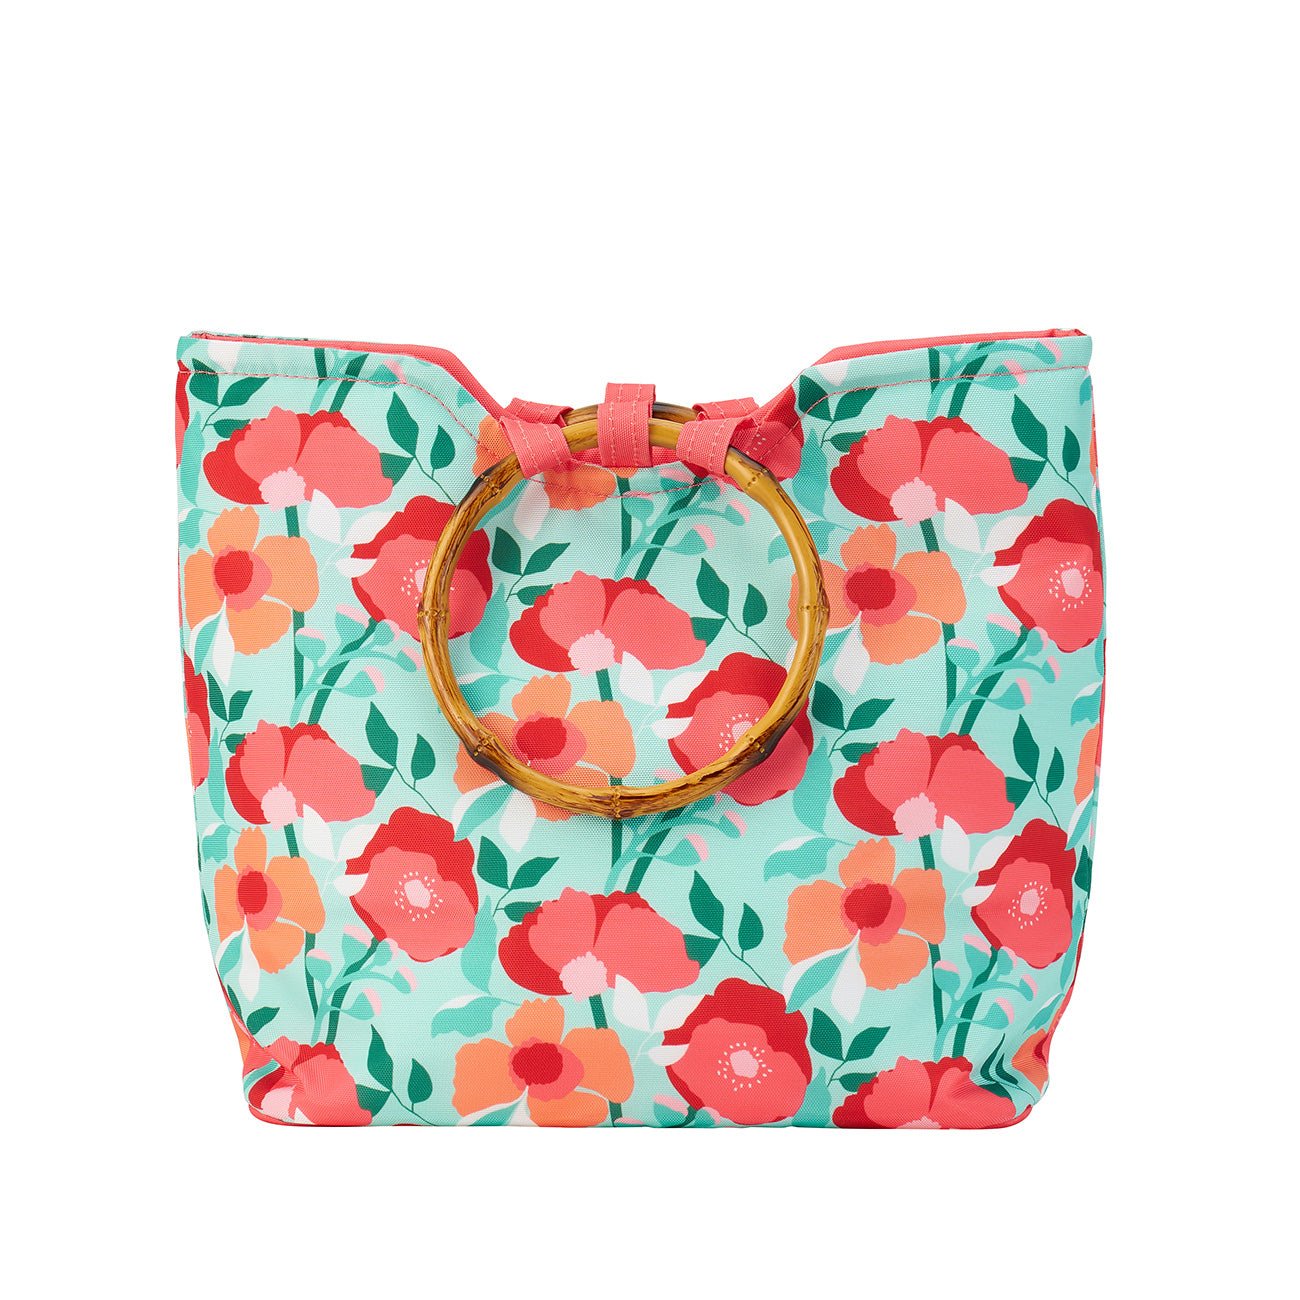 Annabel Trends - Insulated Totes Cooler Bags